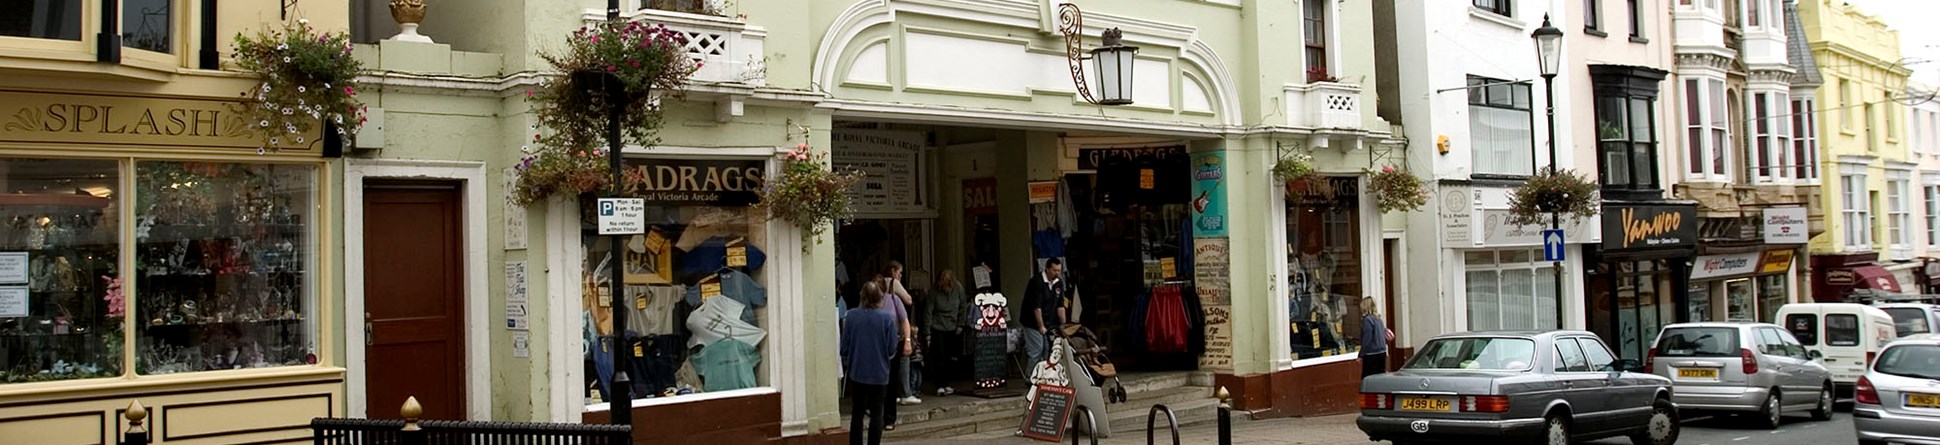 A view of Royal Victoria Arcade on Union Street in Ryde, the Isle of Wight.